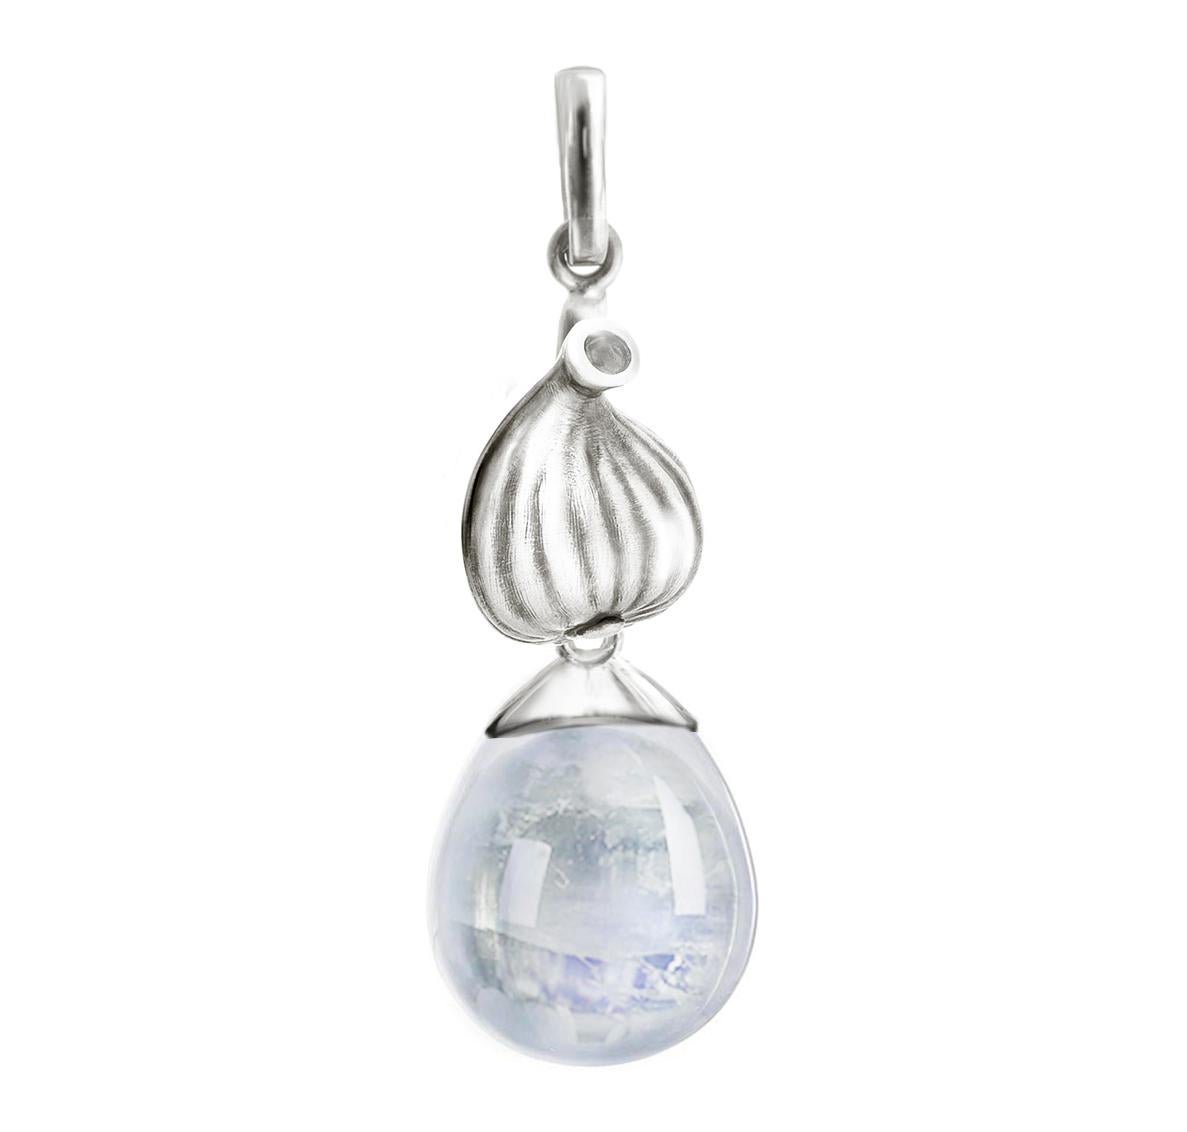 This Fig Garden drop pendant necklace is crafted in 14 karat white gold and features a natural moonstone. The gem drop is designed to allow light to pass through, giving it a radiant appearance. The necklace measures approximately 4 cm in length and